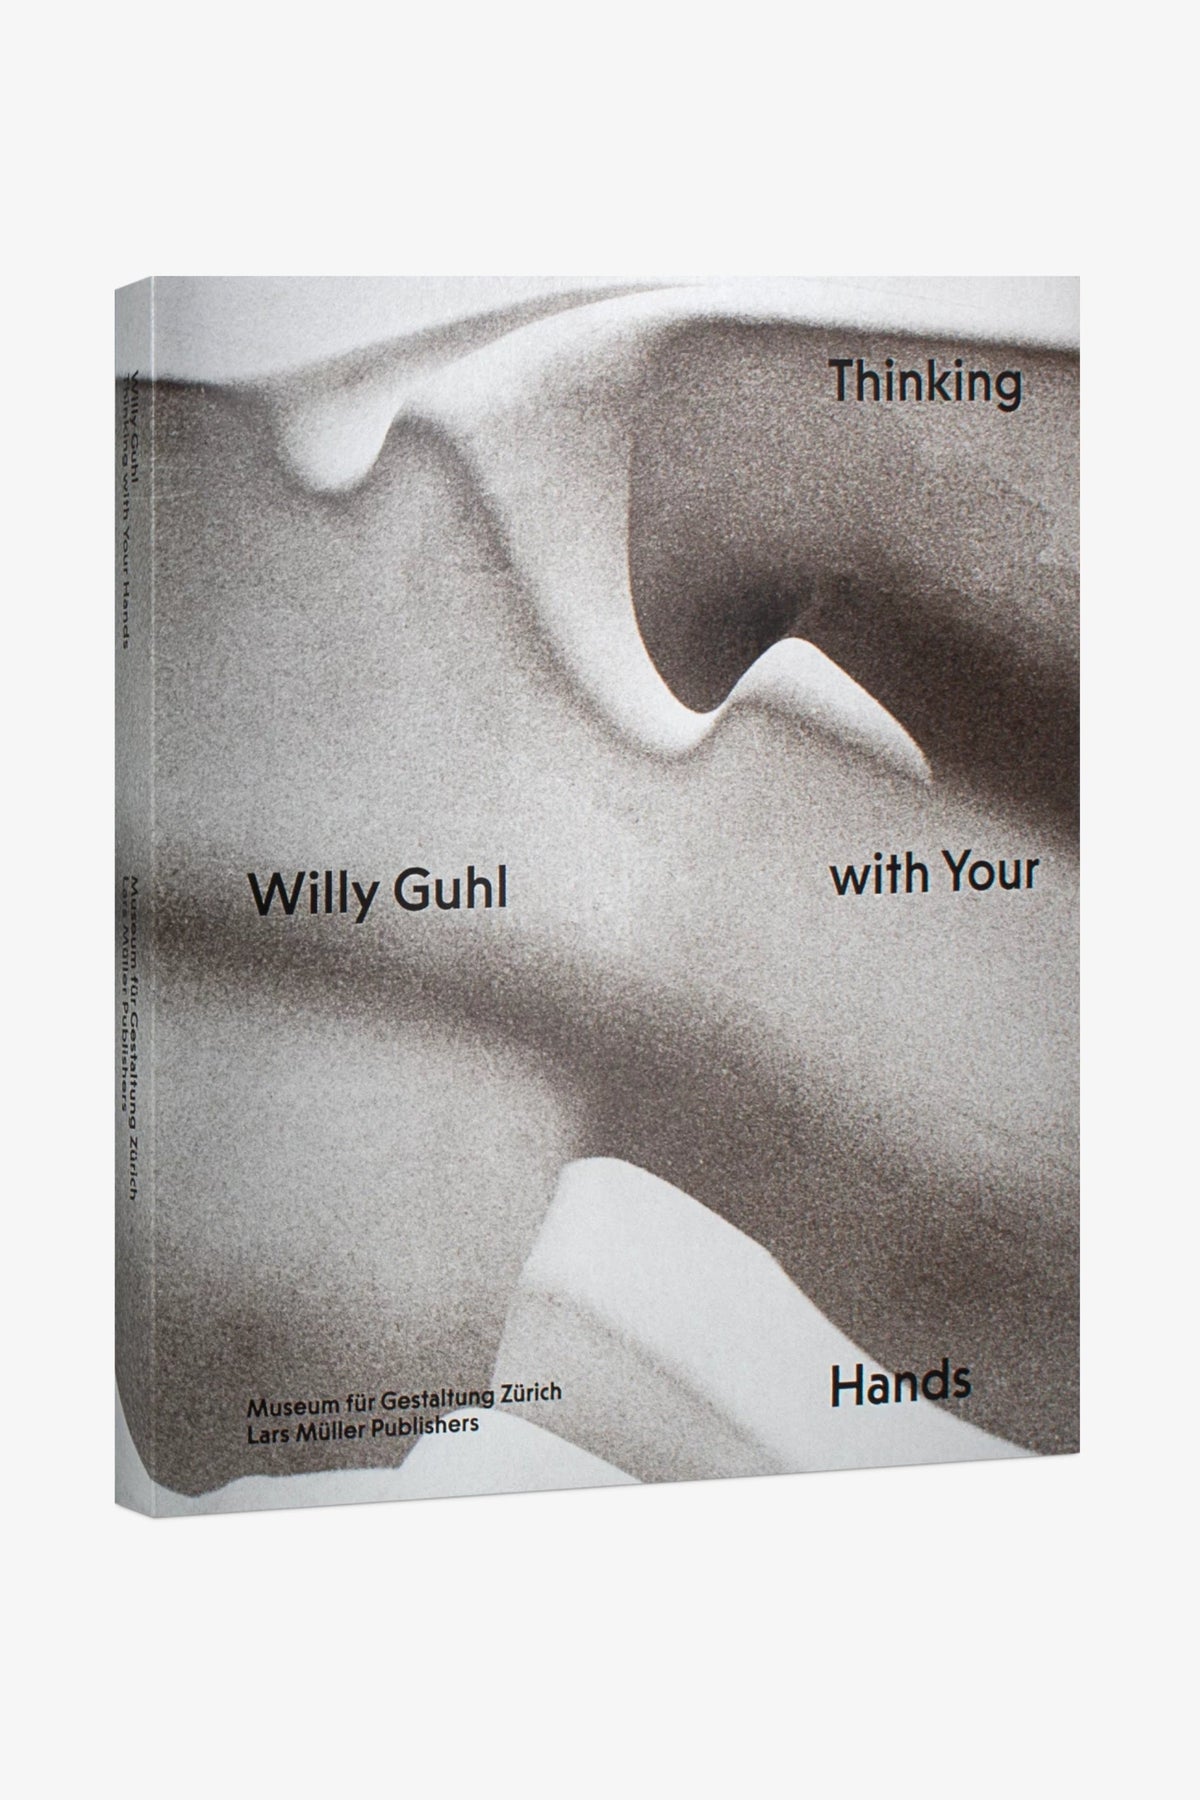 Willy Guhl: Thinking with Your Hands - Lars Müller Publishers